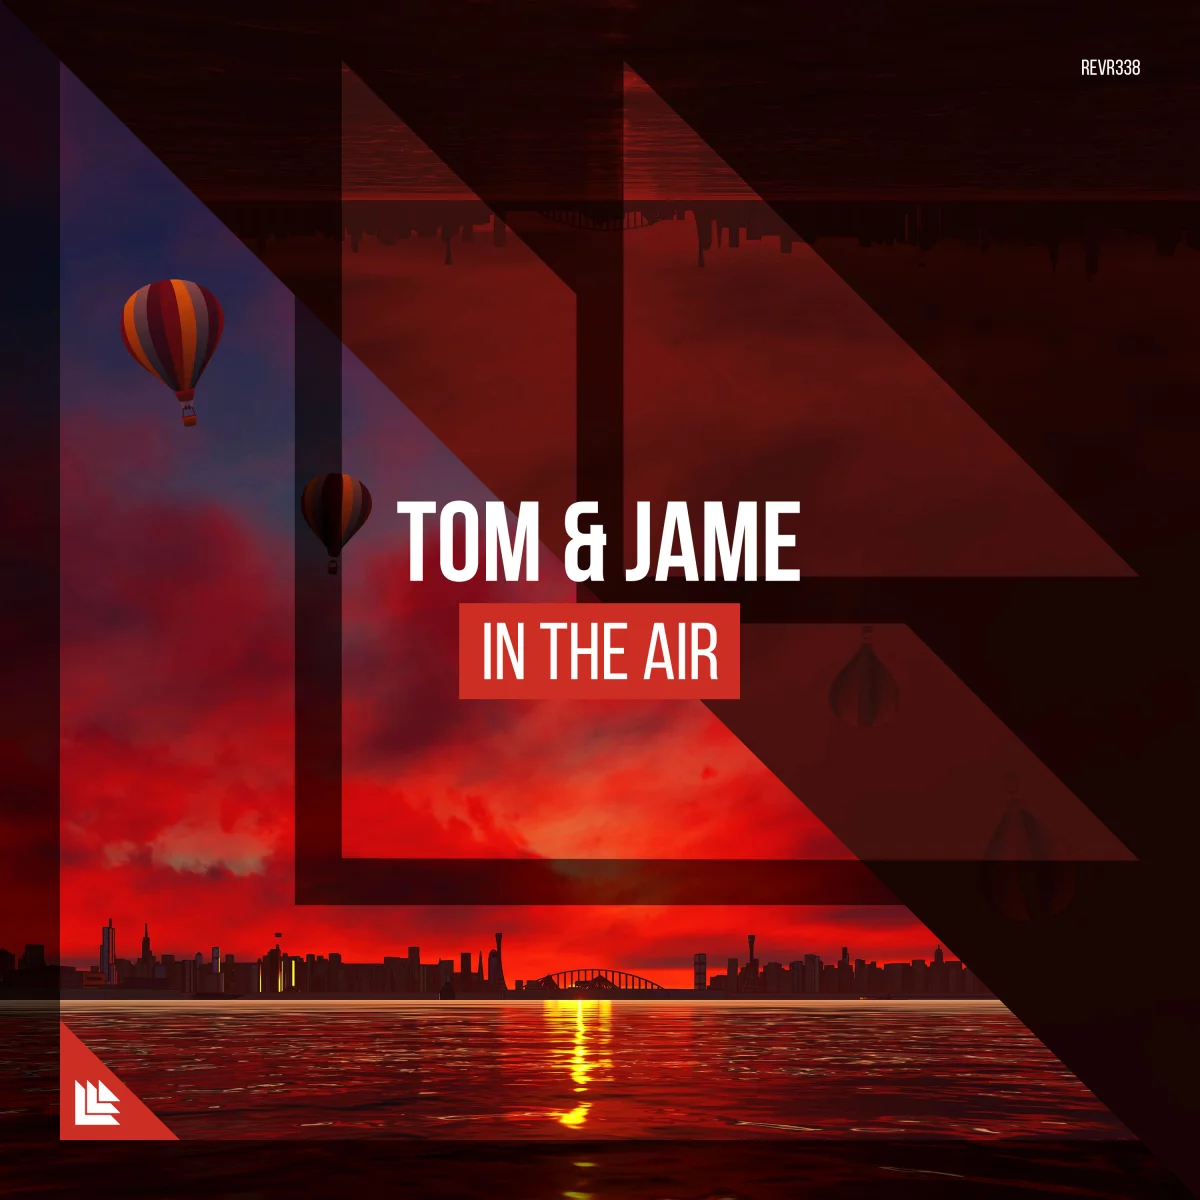 In The Air - Tom & Jame⁠ 